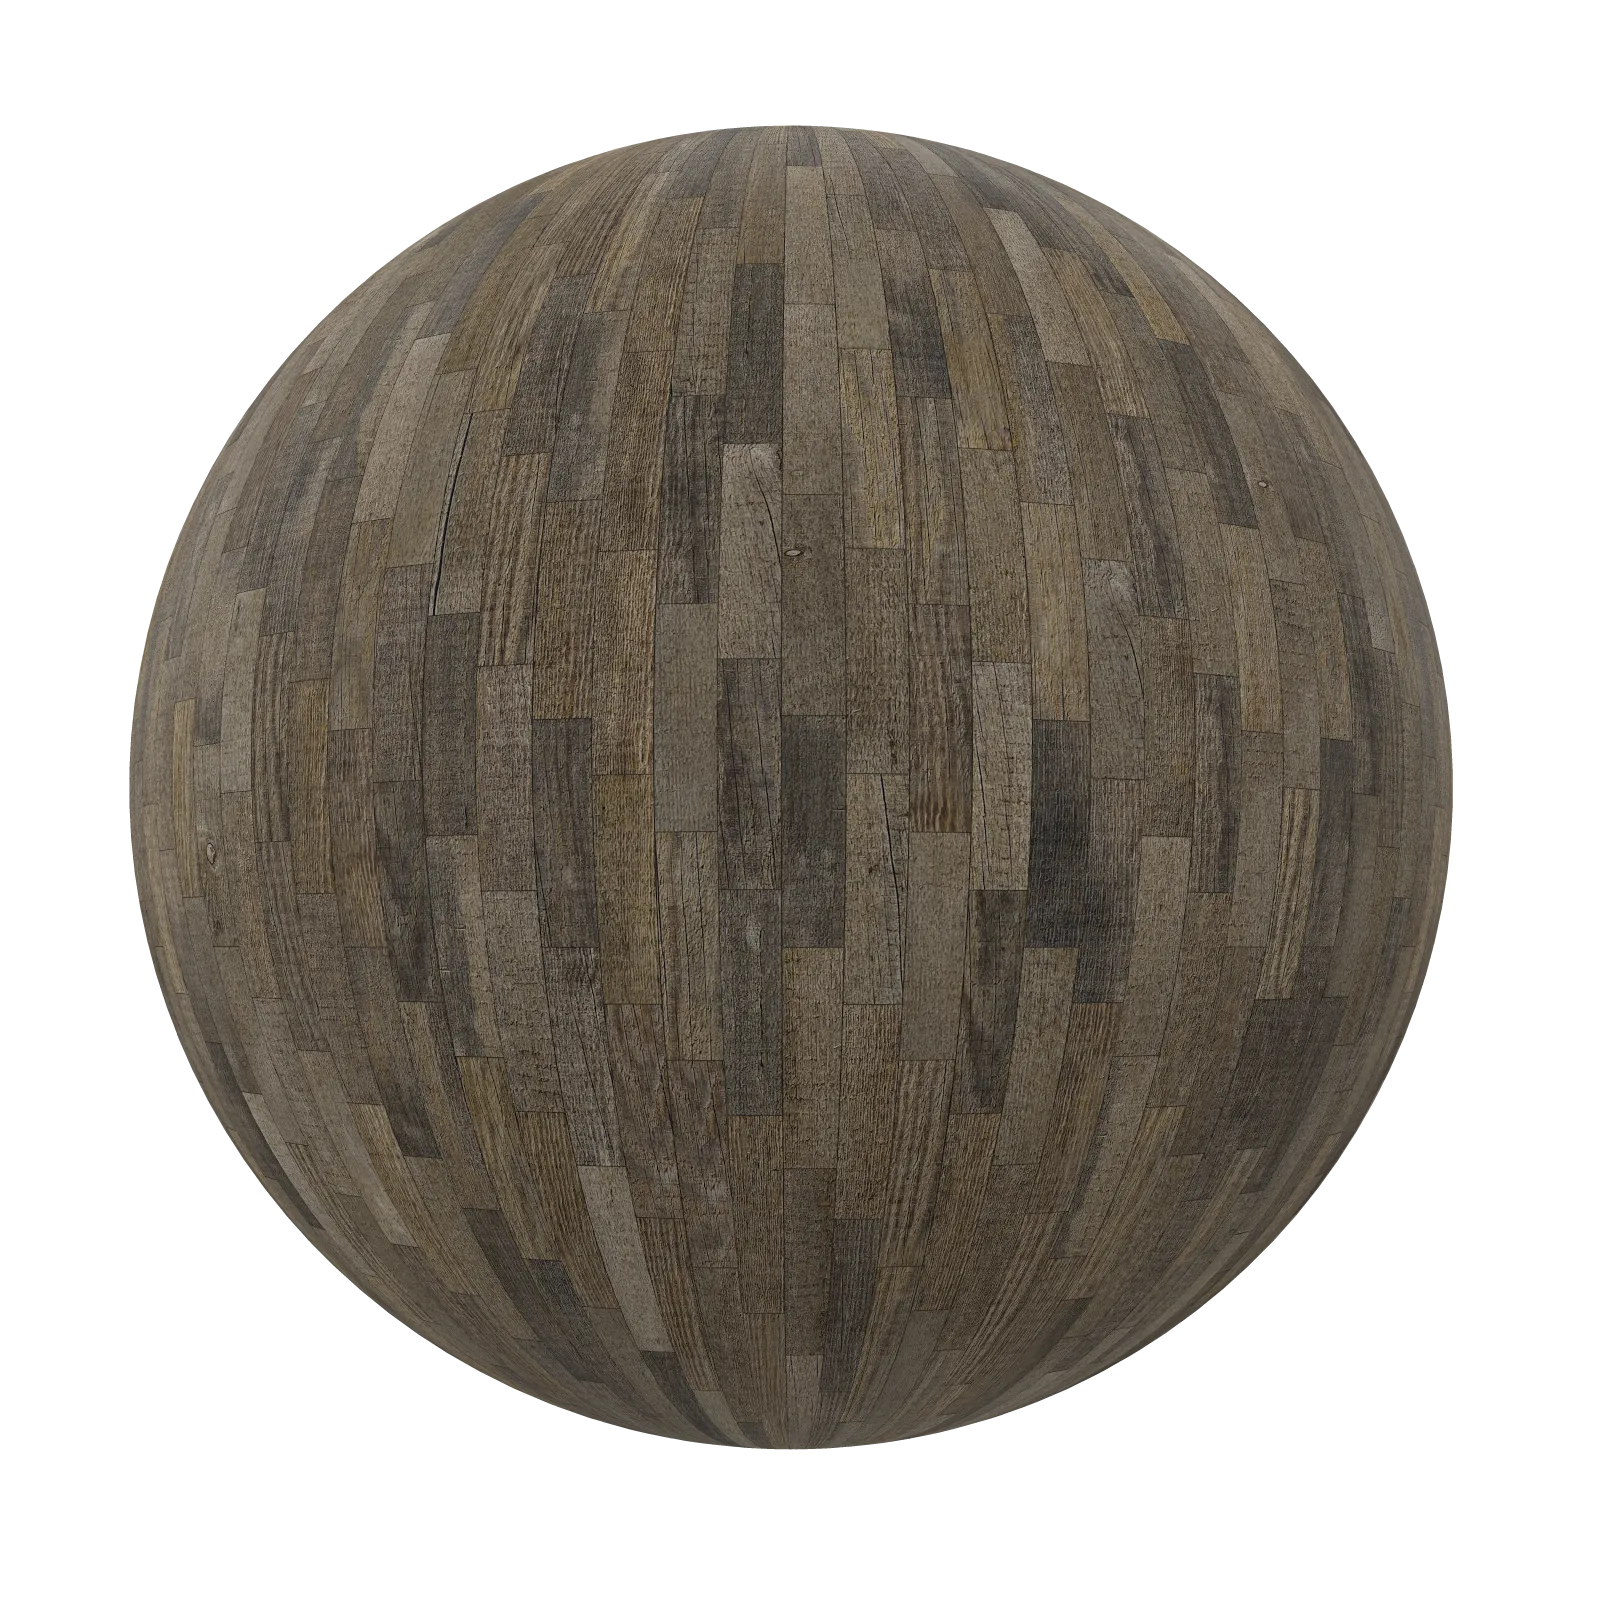 TEXTURES – WOOD – Old Wood Tiles 18